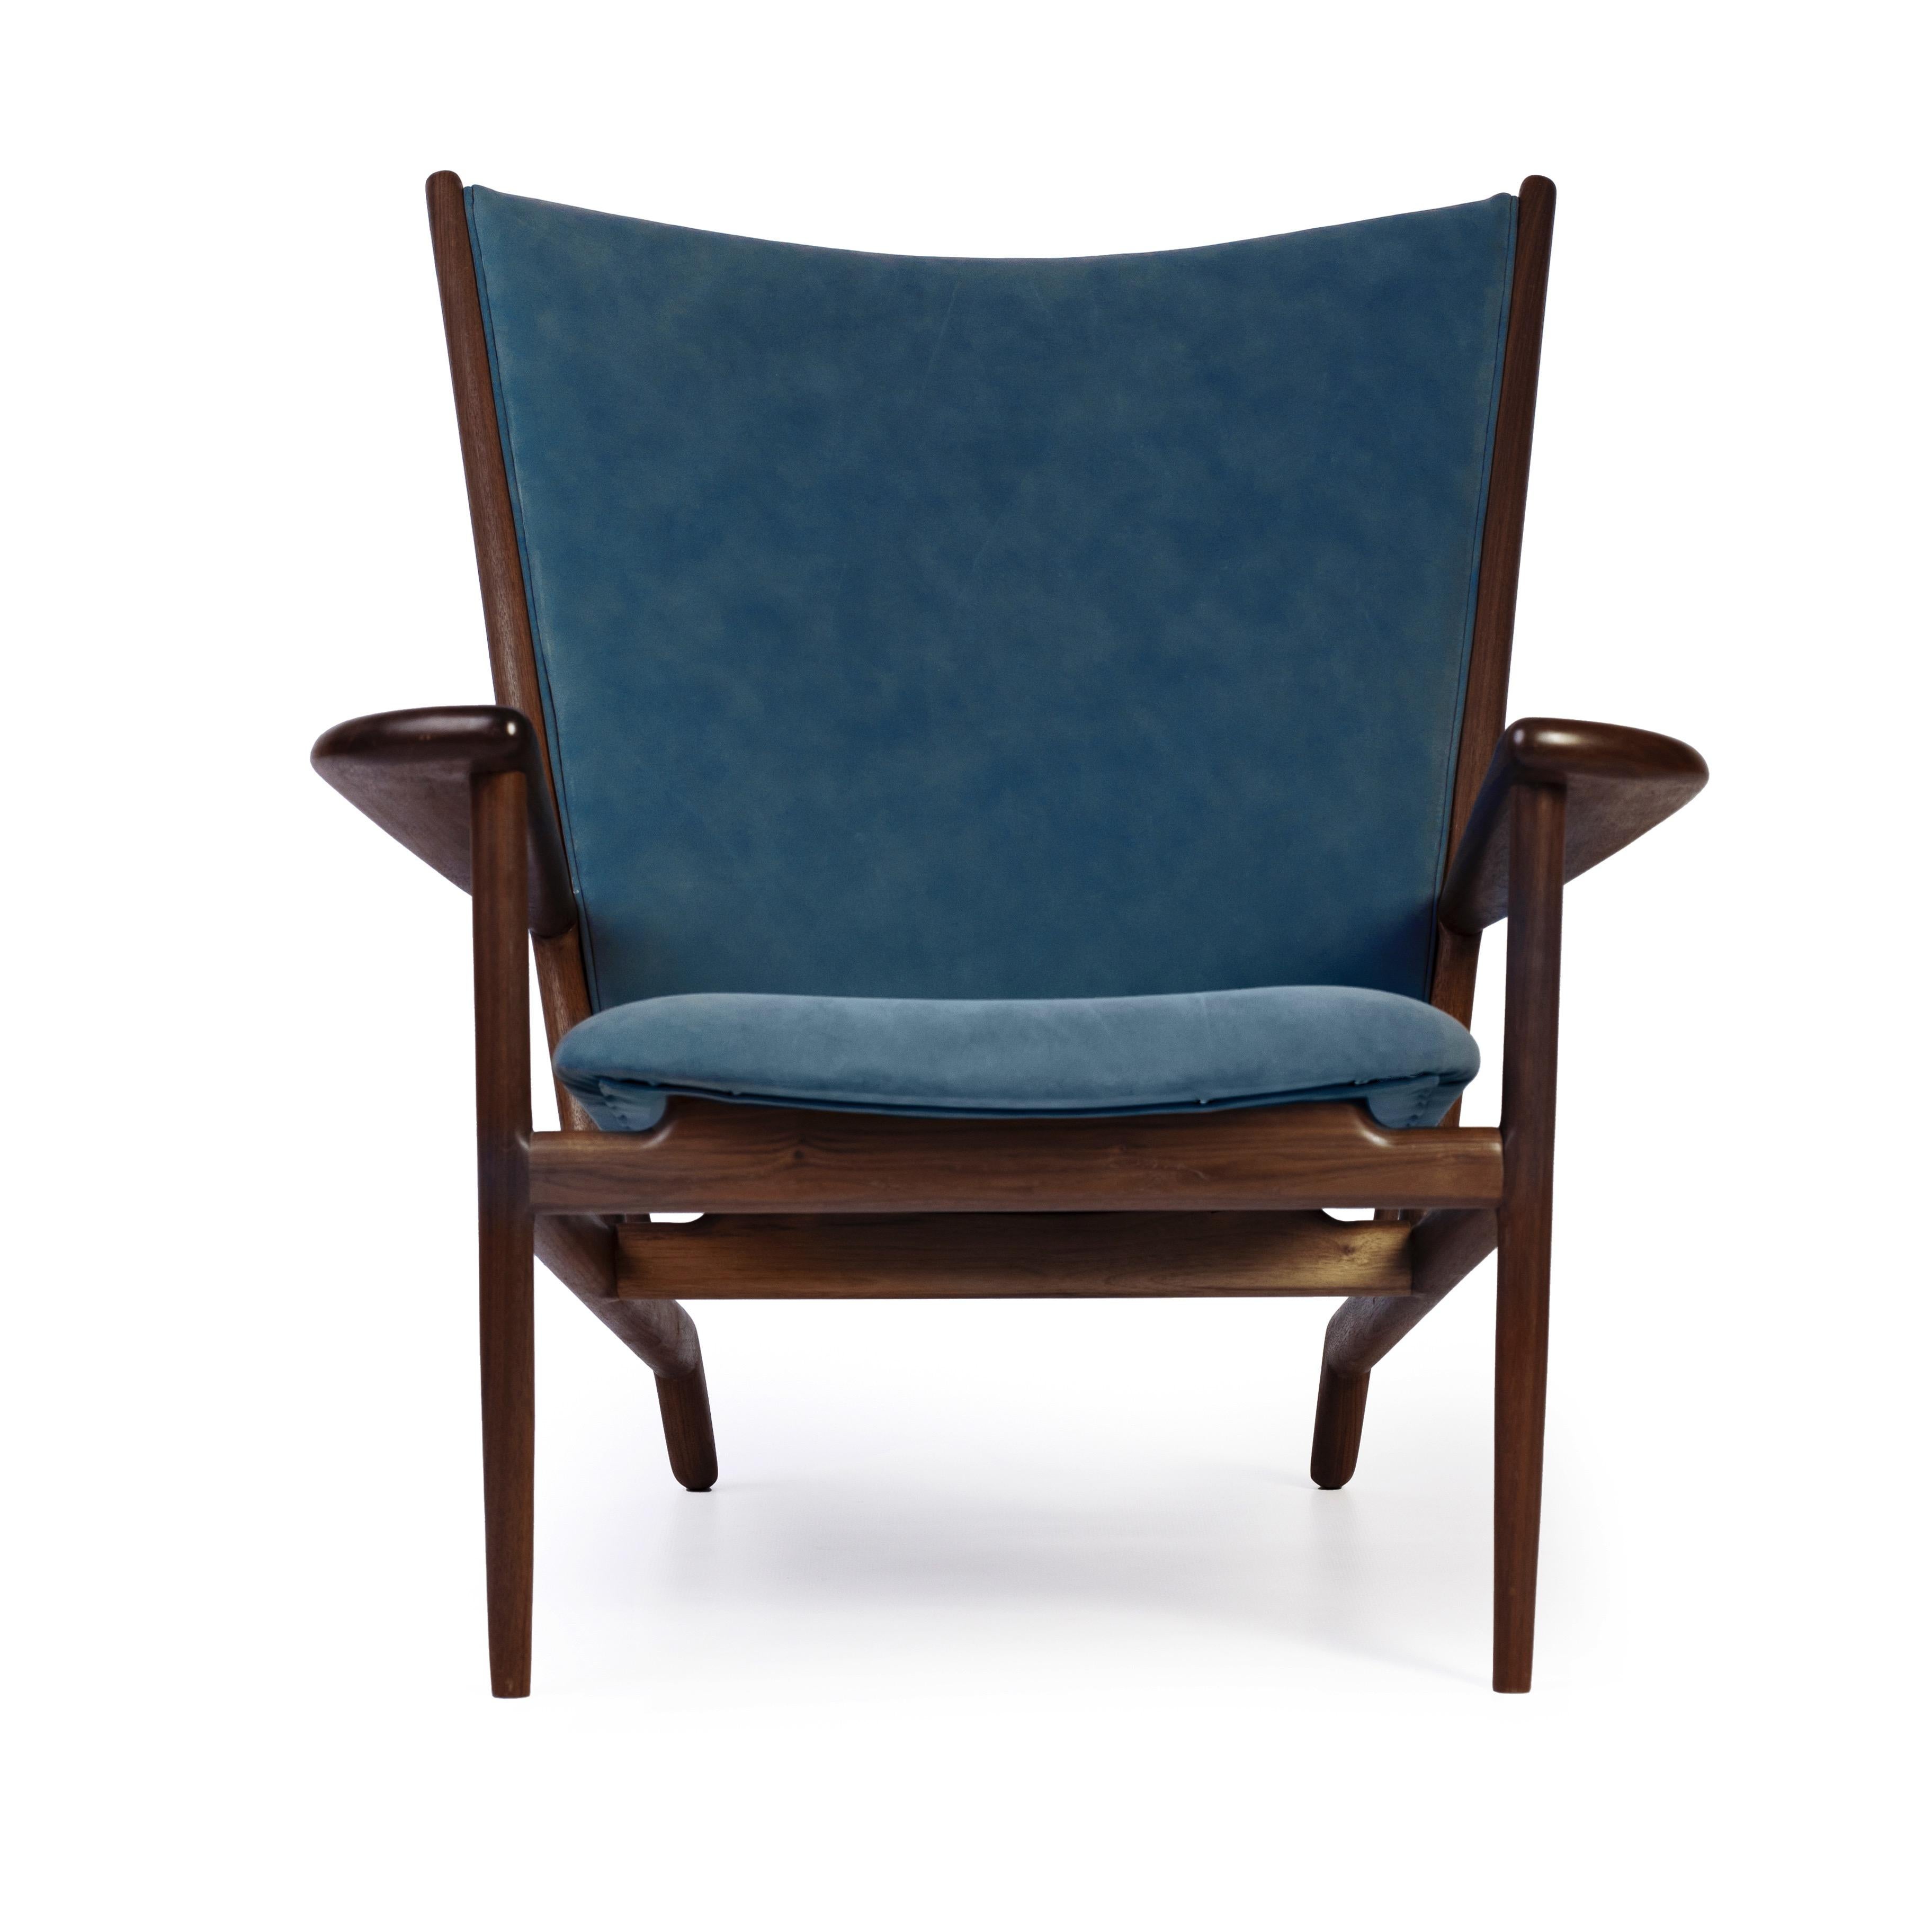 Introducing the 63 chair, a stunning mid-century modern statement piece handcrafted with exceptional woodworking techniques and premium leather upholstery. This impressive chair boasts a robust walnut frame, carefully selected for its rich grain and